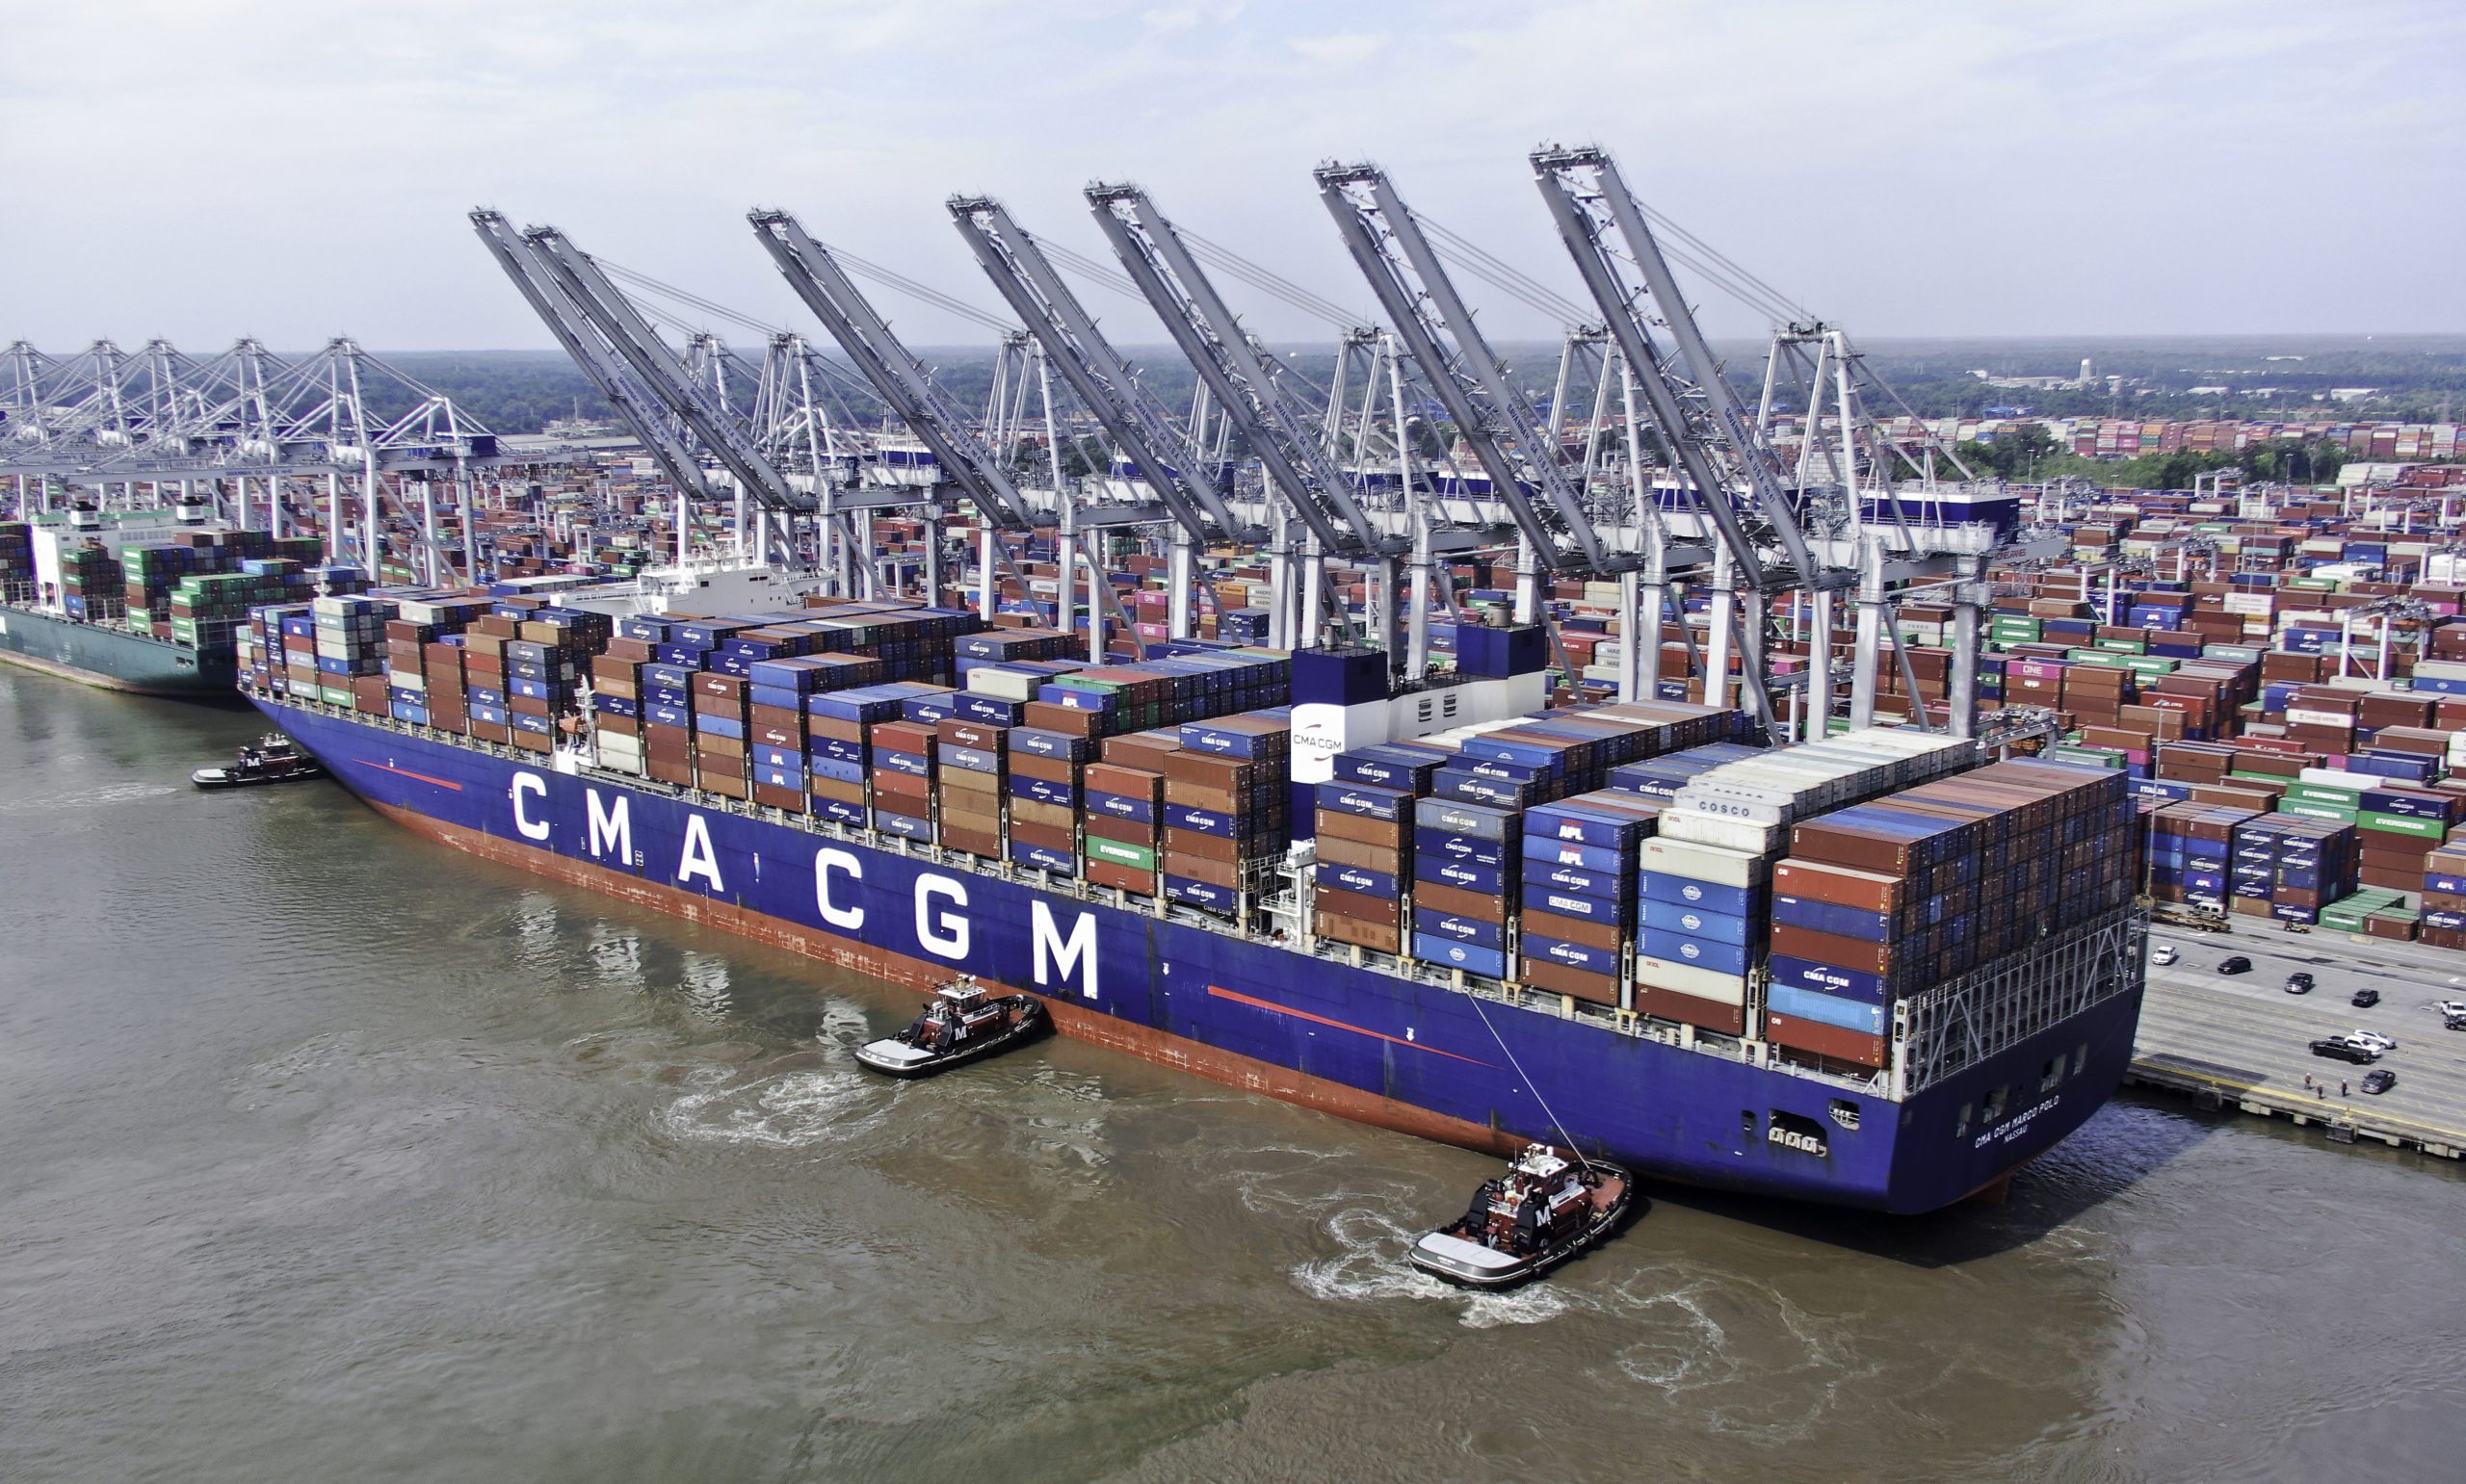 Tugs assist a CMA CGM containership to its berth at the Port of Savannah